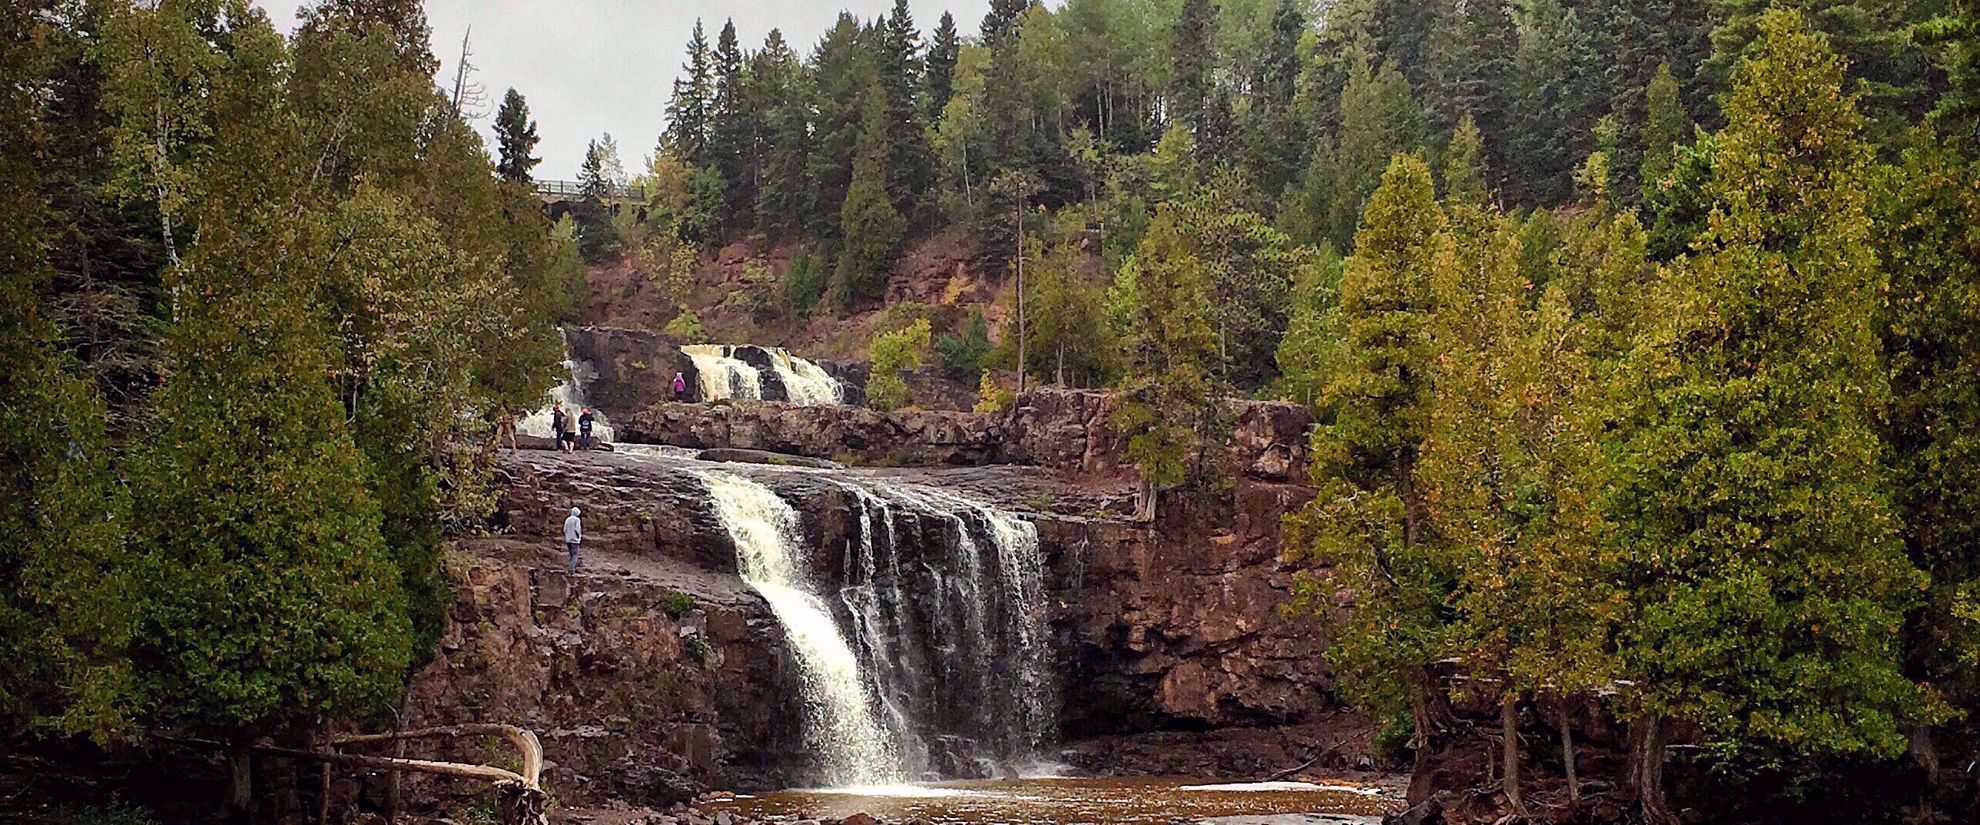 Waterfall on the superior hiking trail